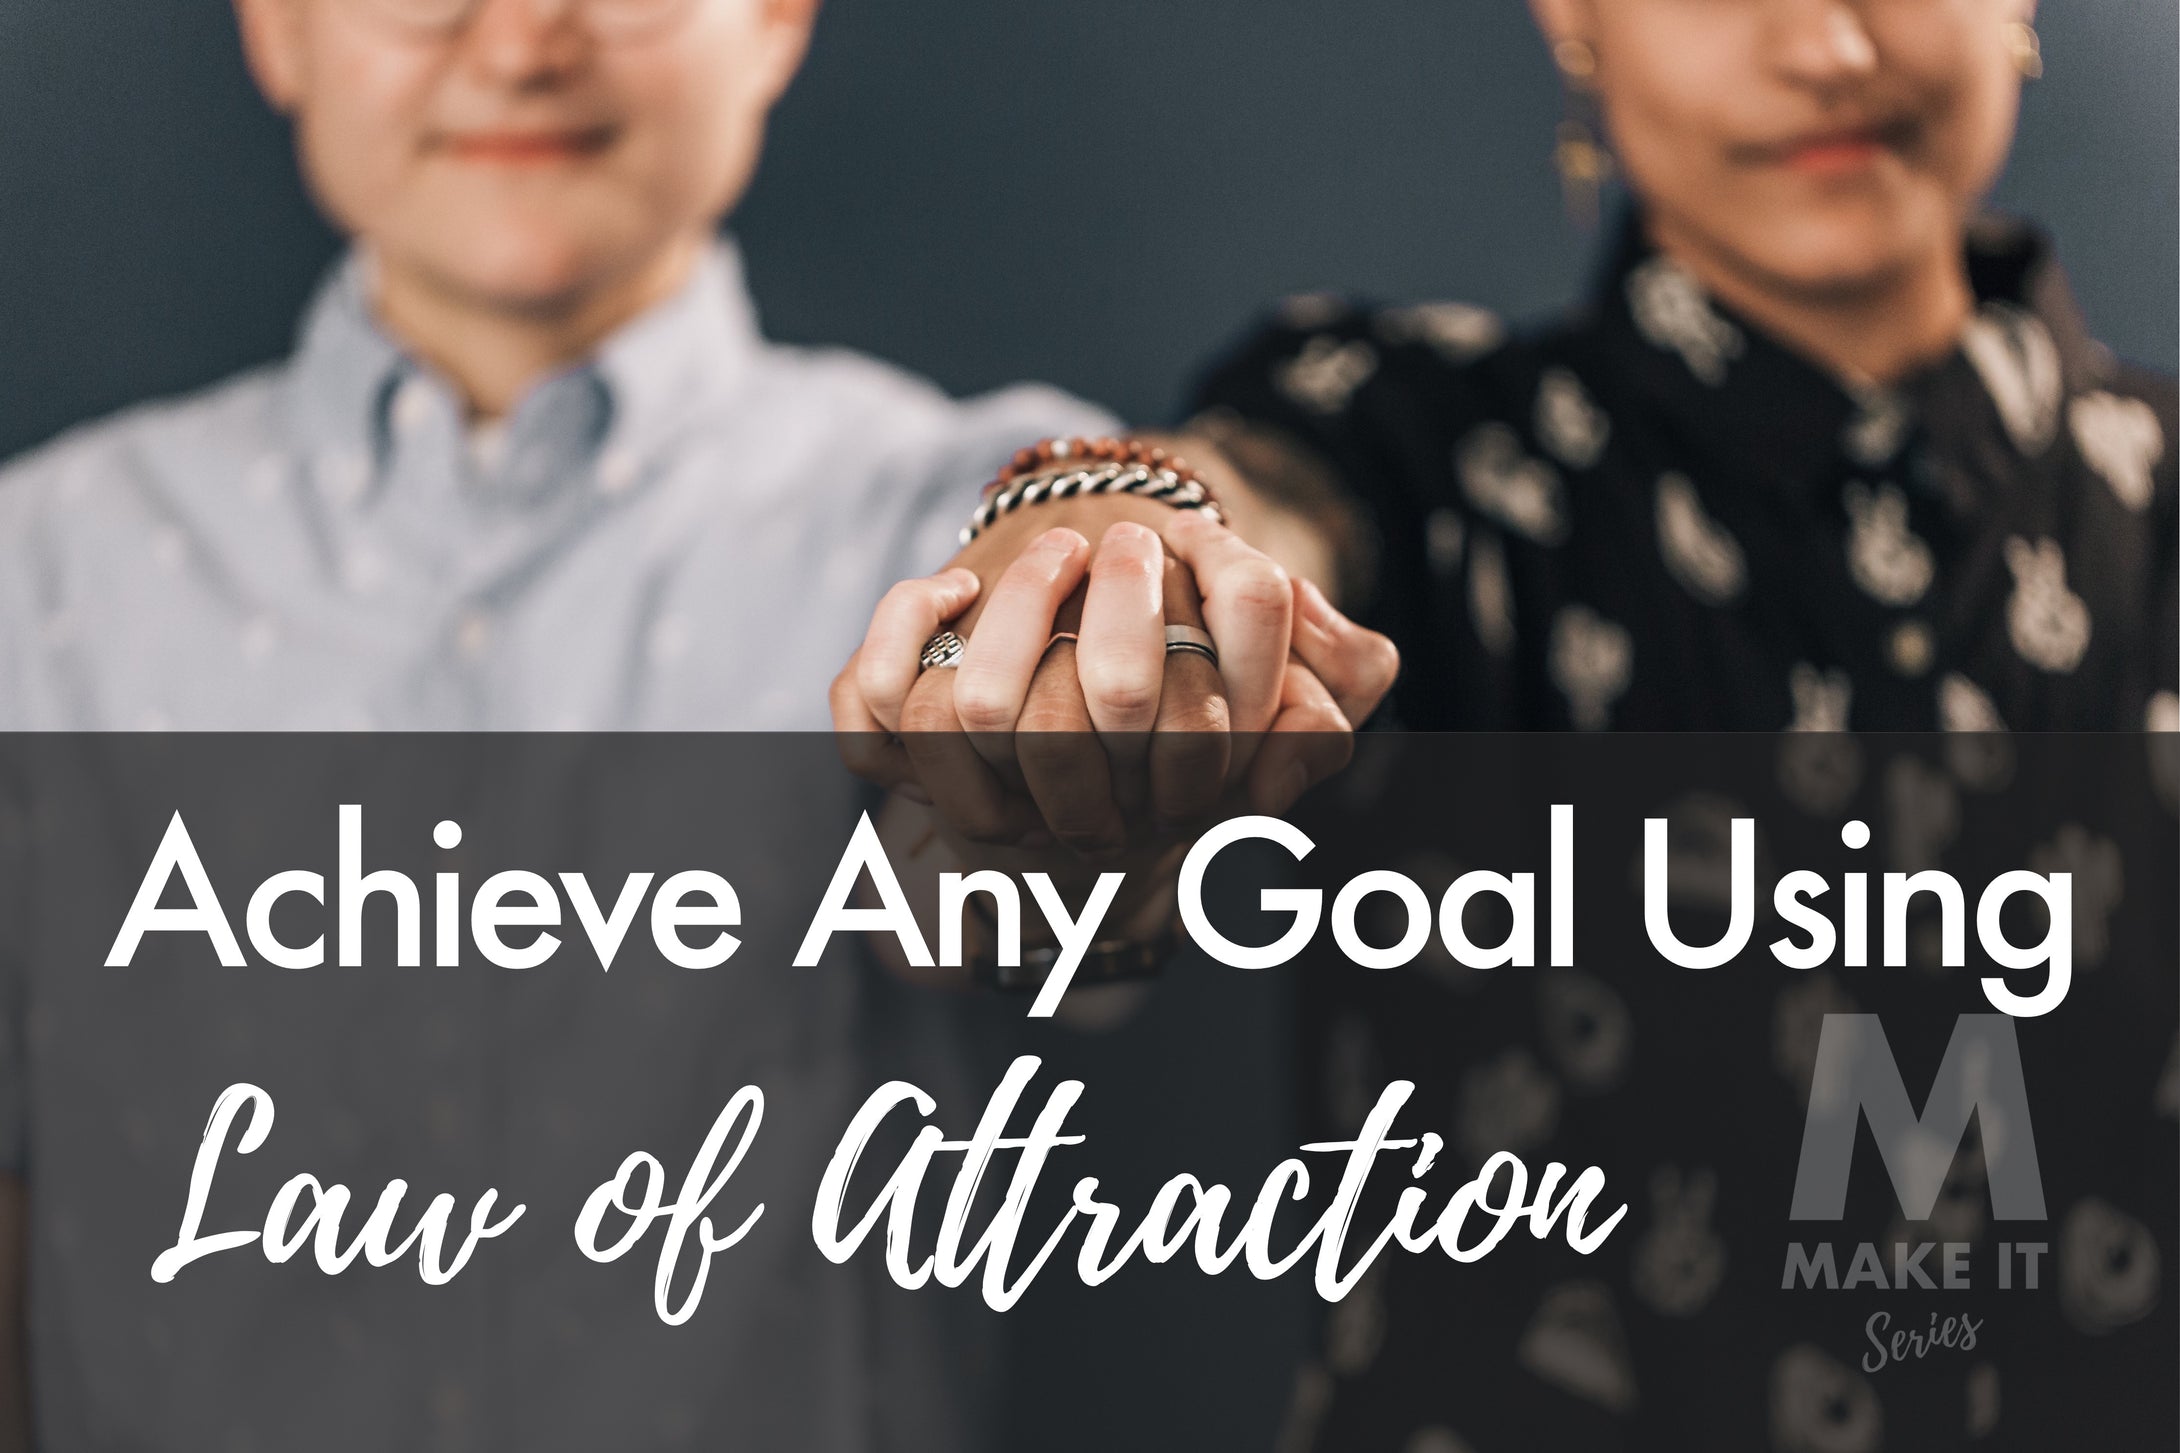 6 Steps To Achieve Any Goal Using the Law of Attraction